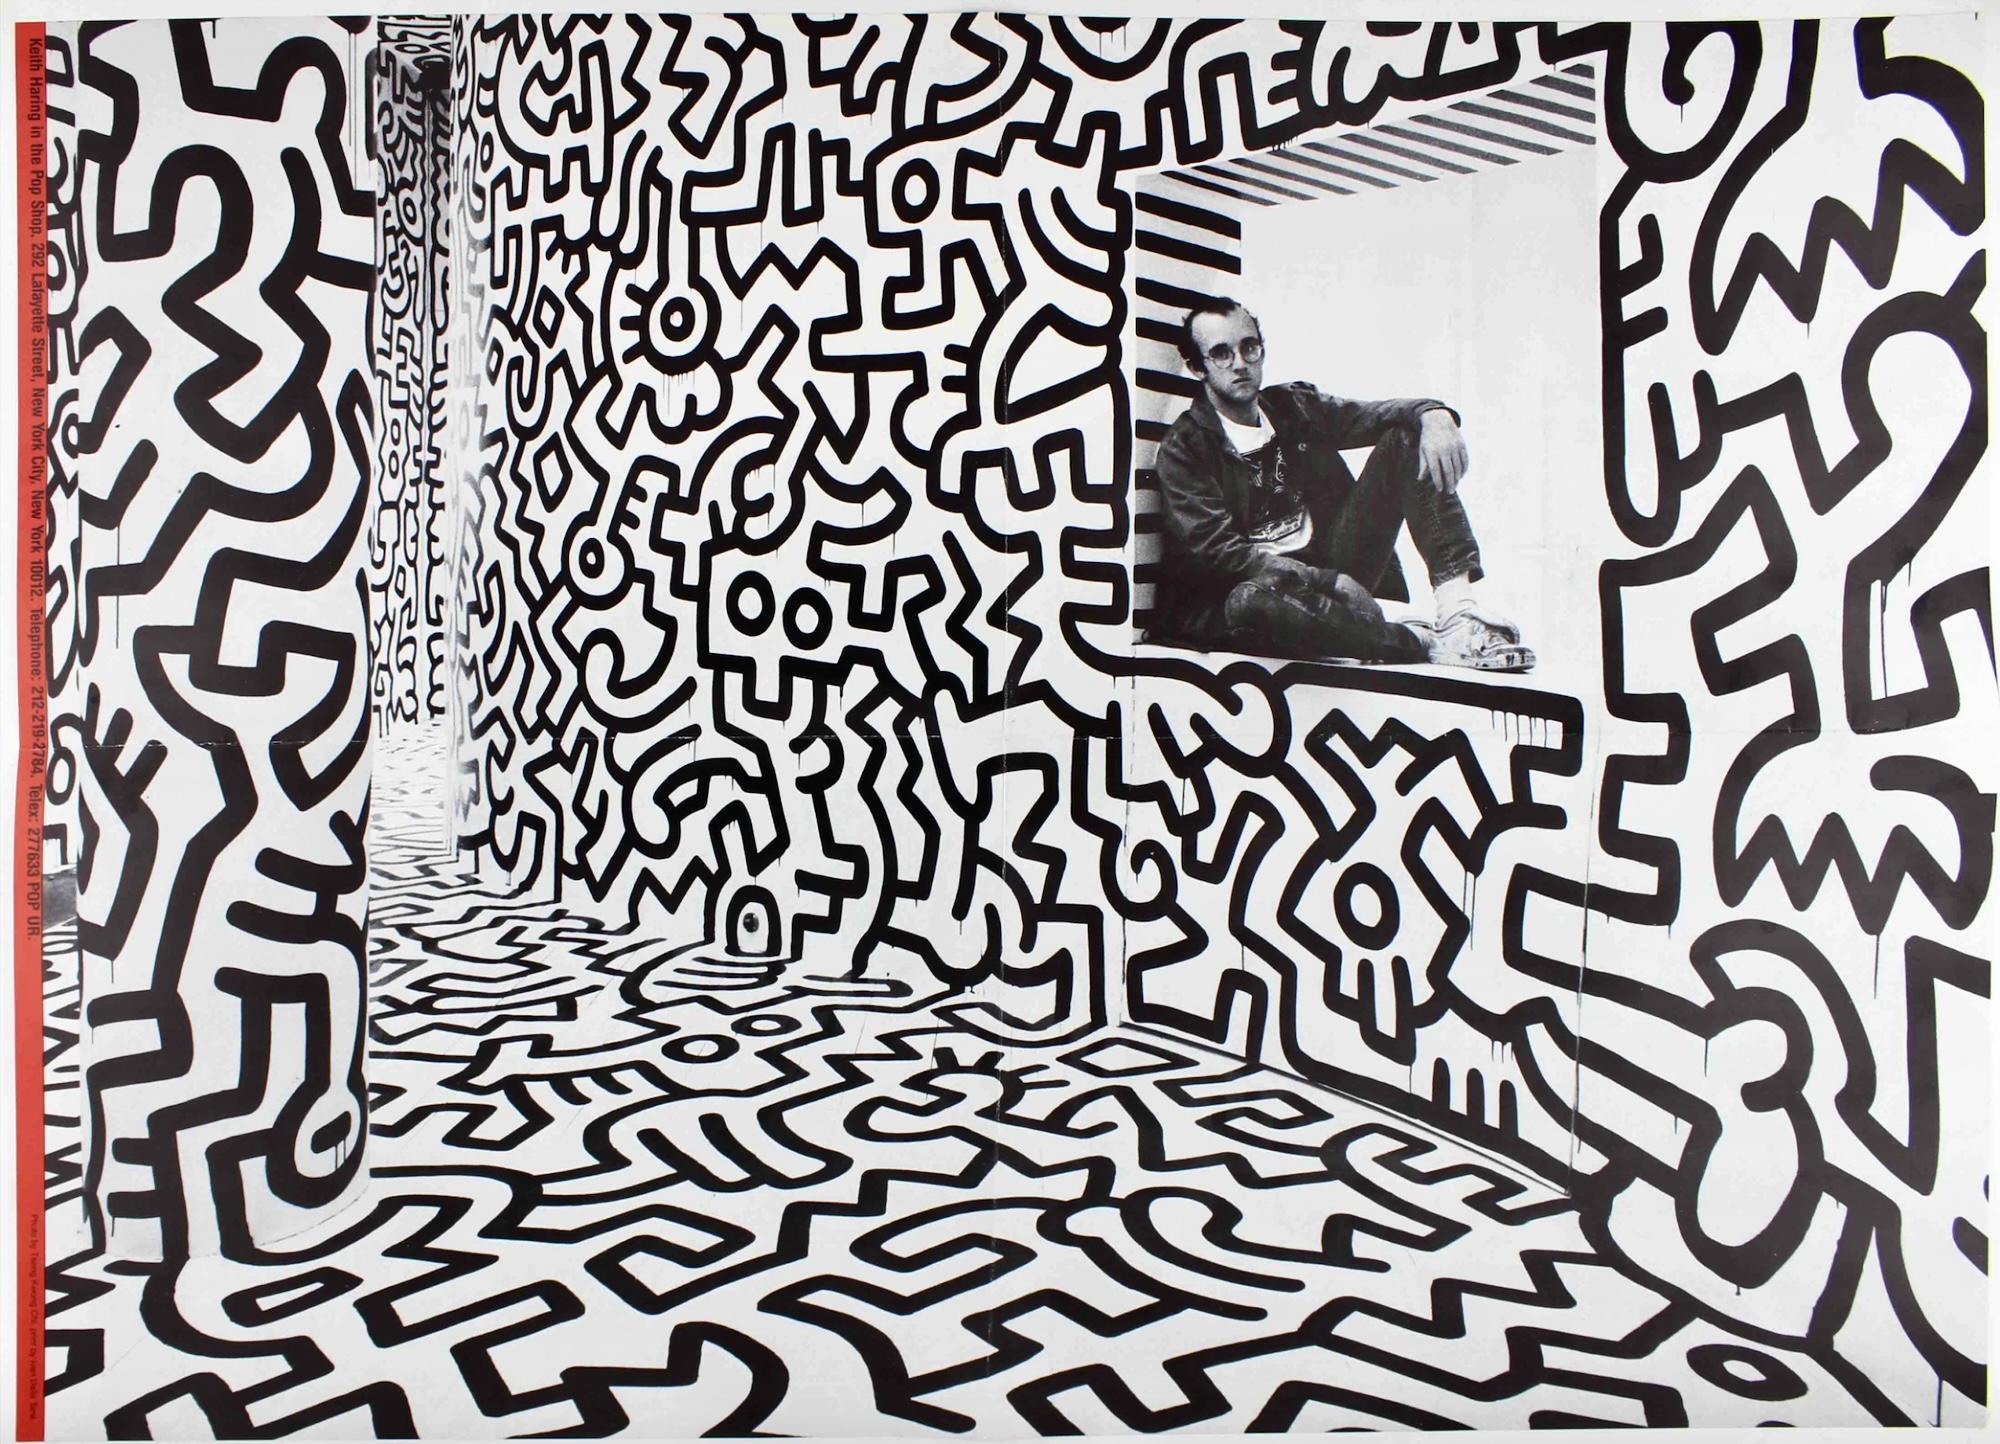 Keith Haring Pop Shop poster (vintage Keith Haring posters)